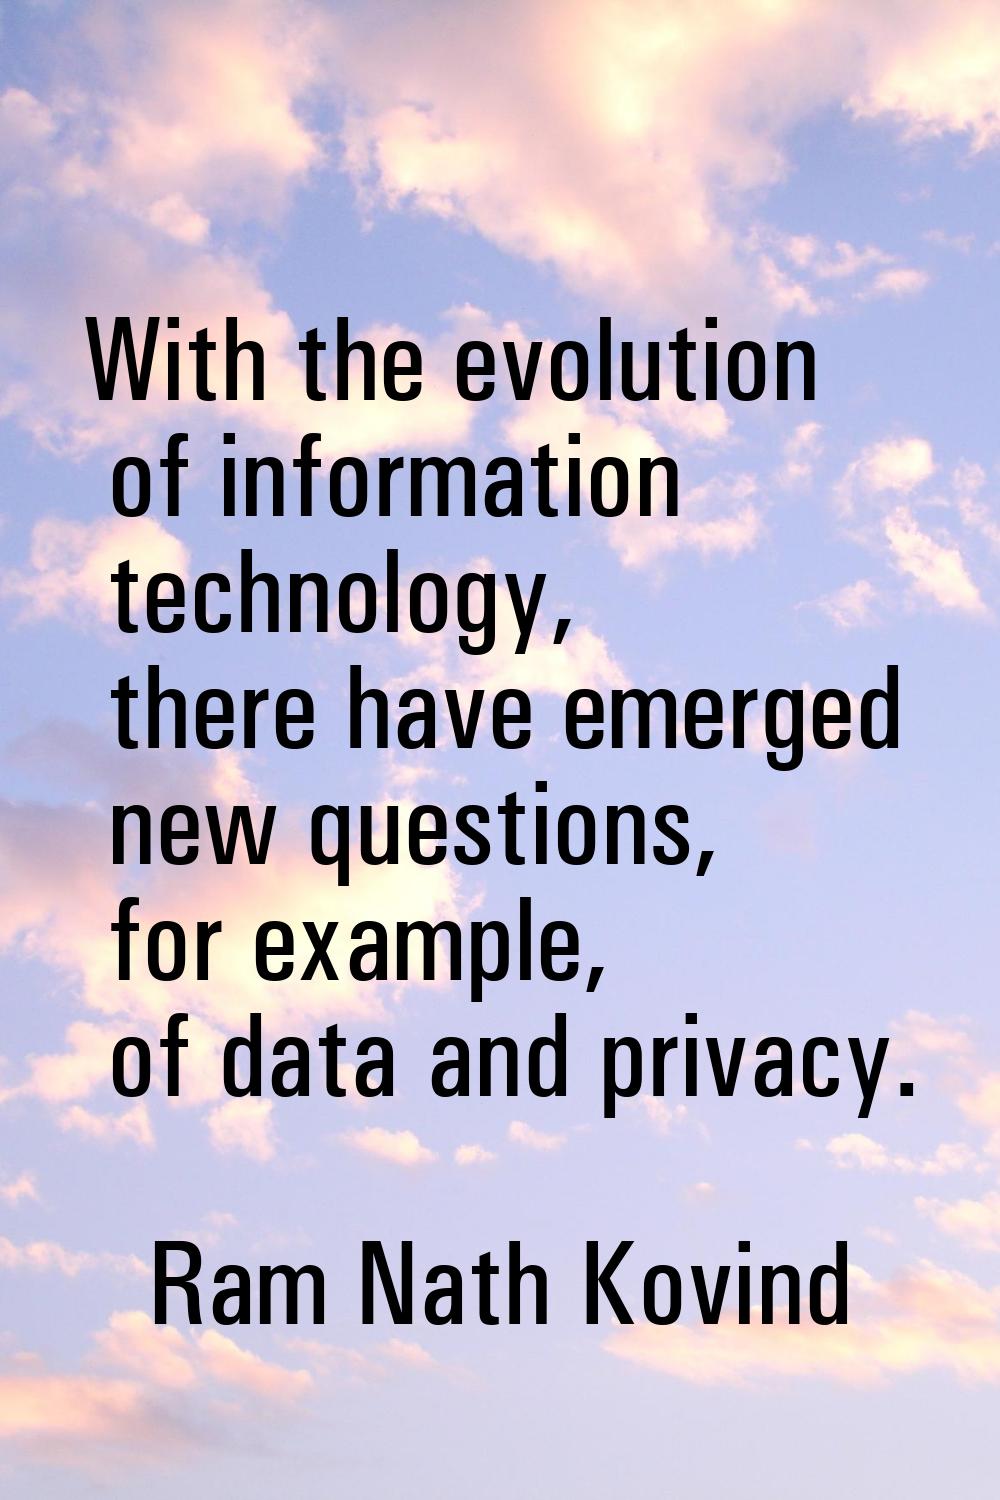 With the evolution of information technology, there have emerged new questions, for example, of dat